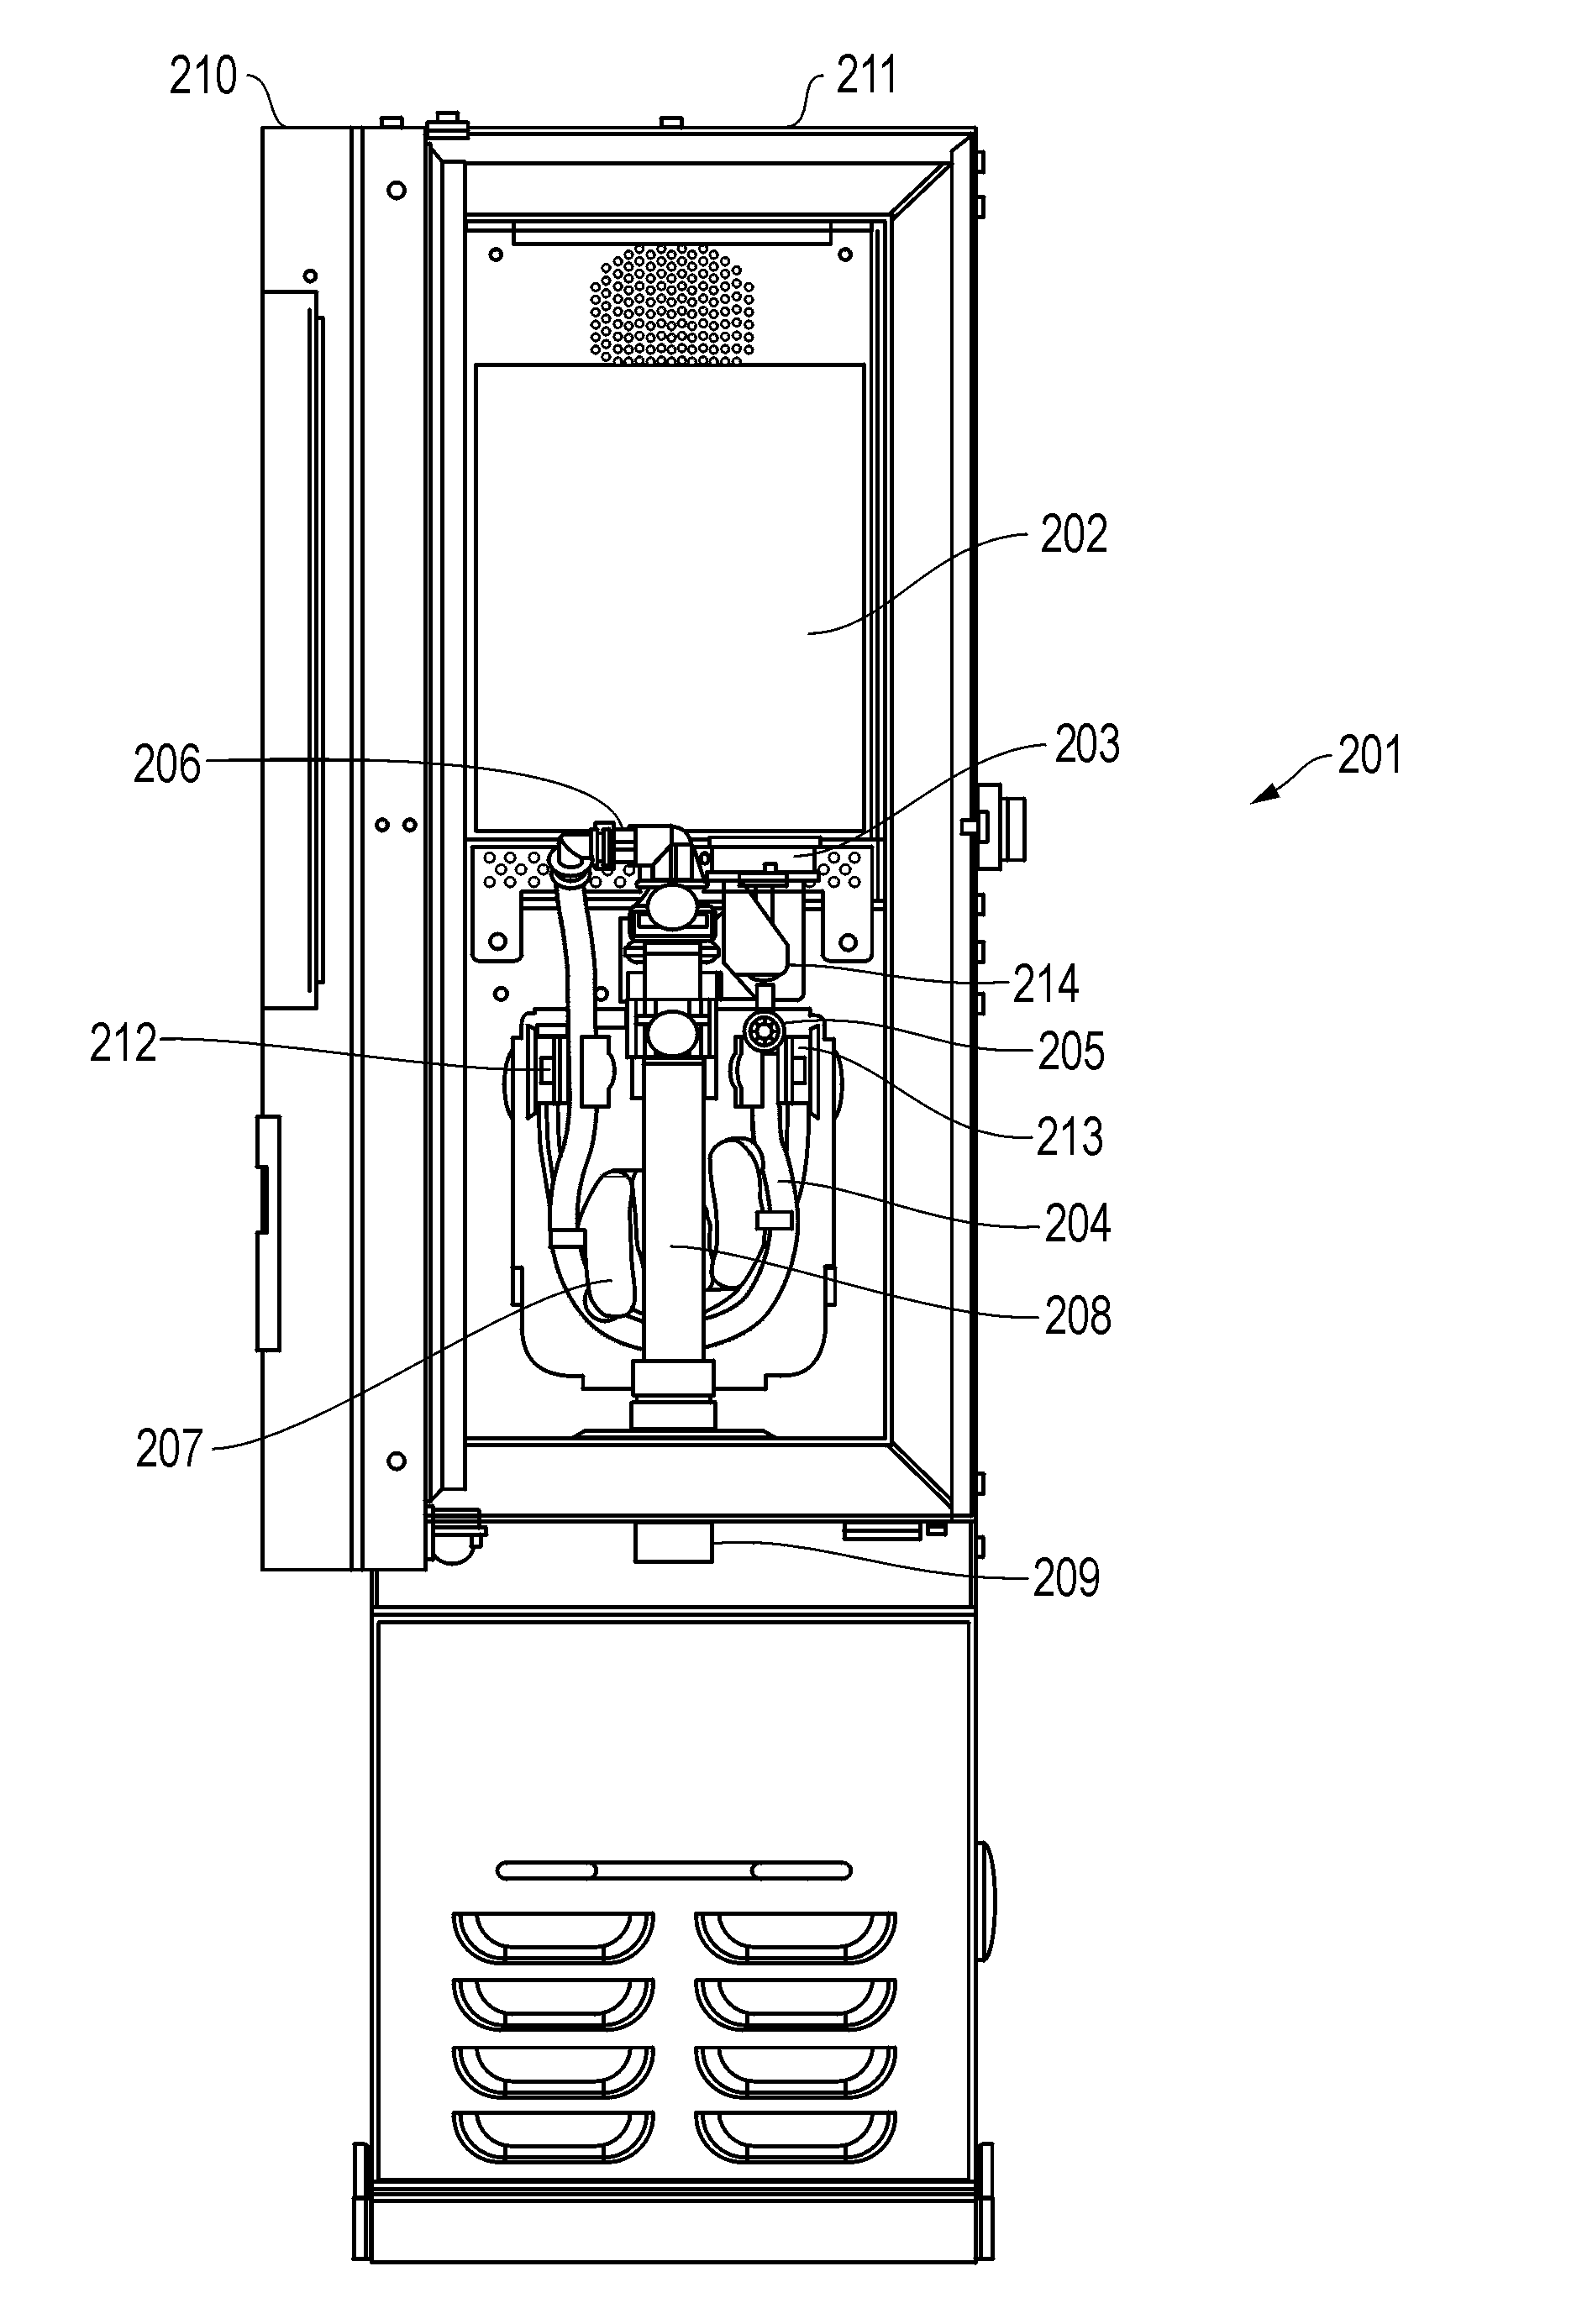 Method and System for Dispensing Whipped Toppings